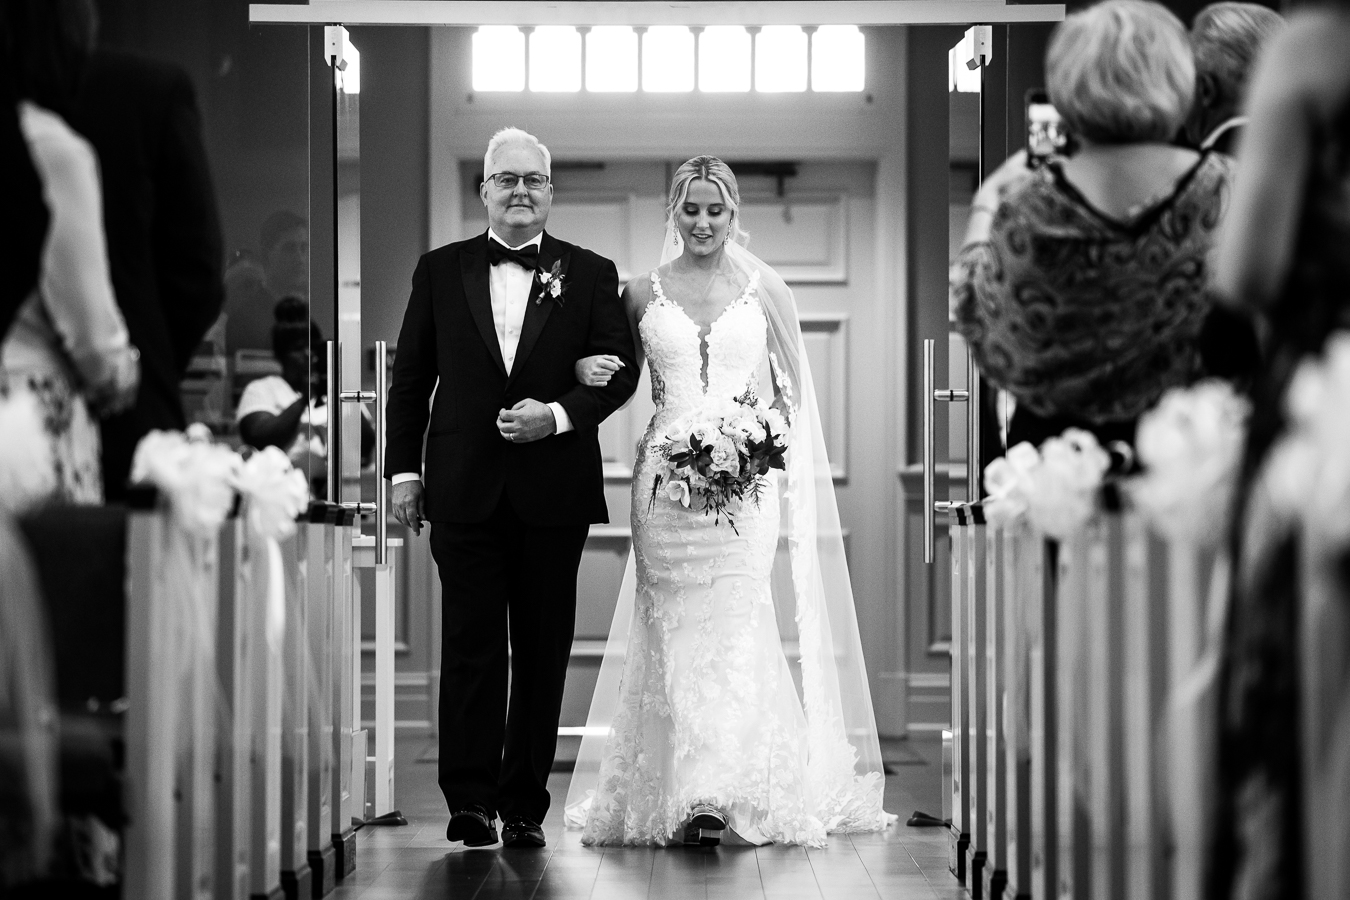 st paul lutheran church wedding photographer, lisa rhinehart, captures this black and white image of the bride and her dad as they walk down the aisle together for the wedding ceremony 